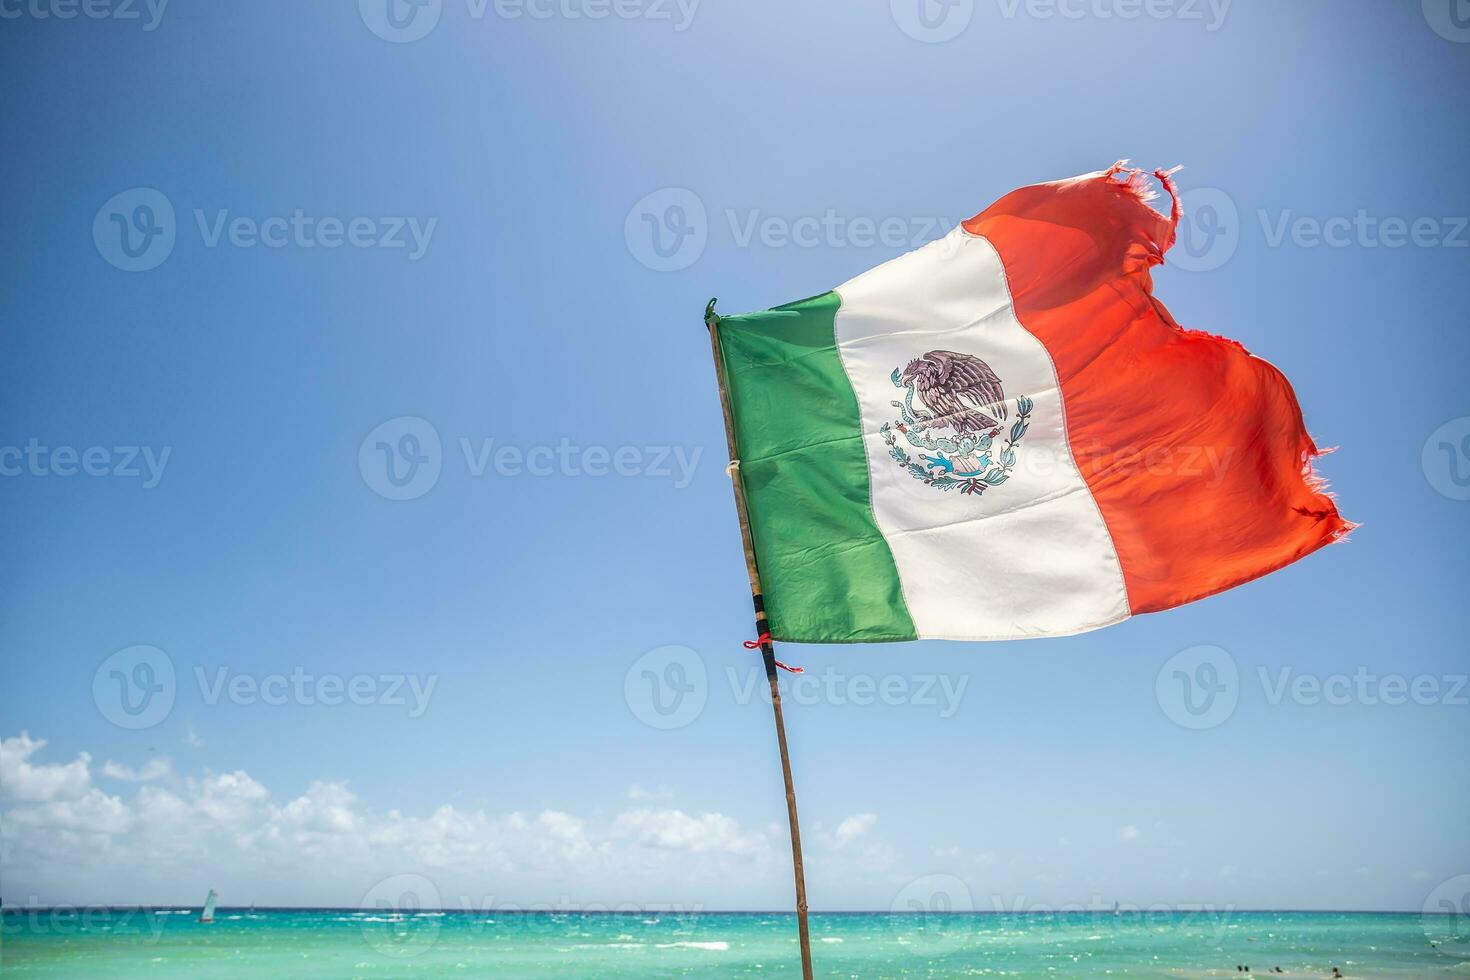 Mexican flag partially ripped by the wind blowing from the turquiose Carribean Sea photo